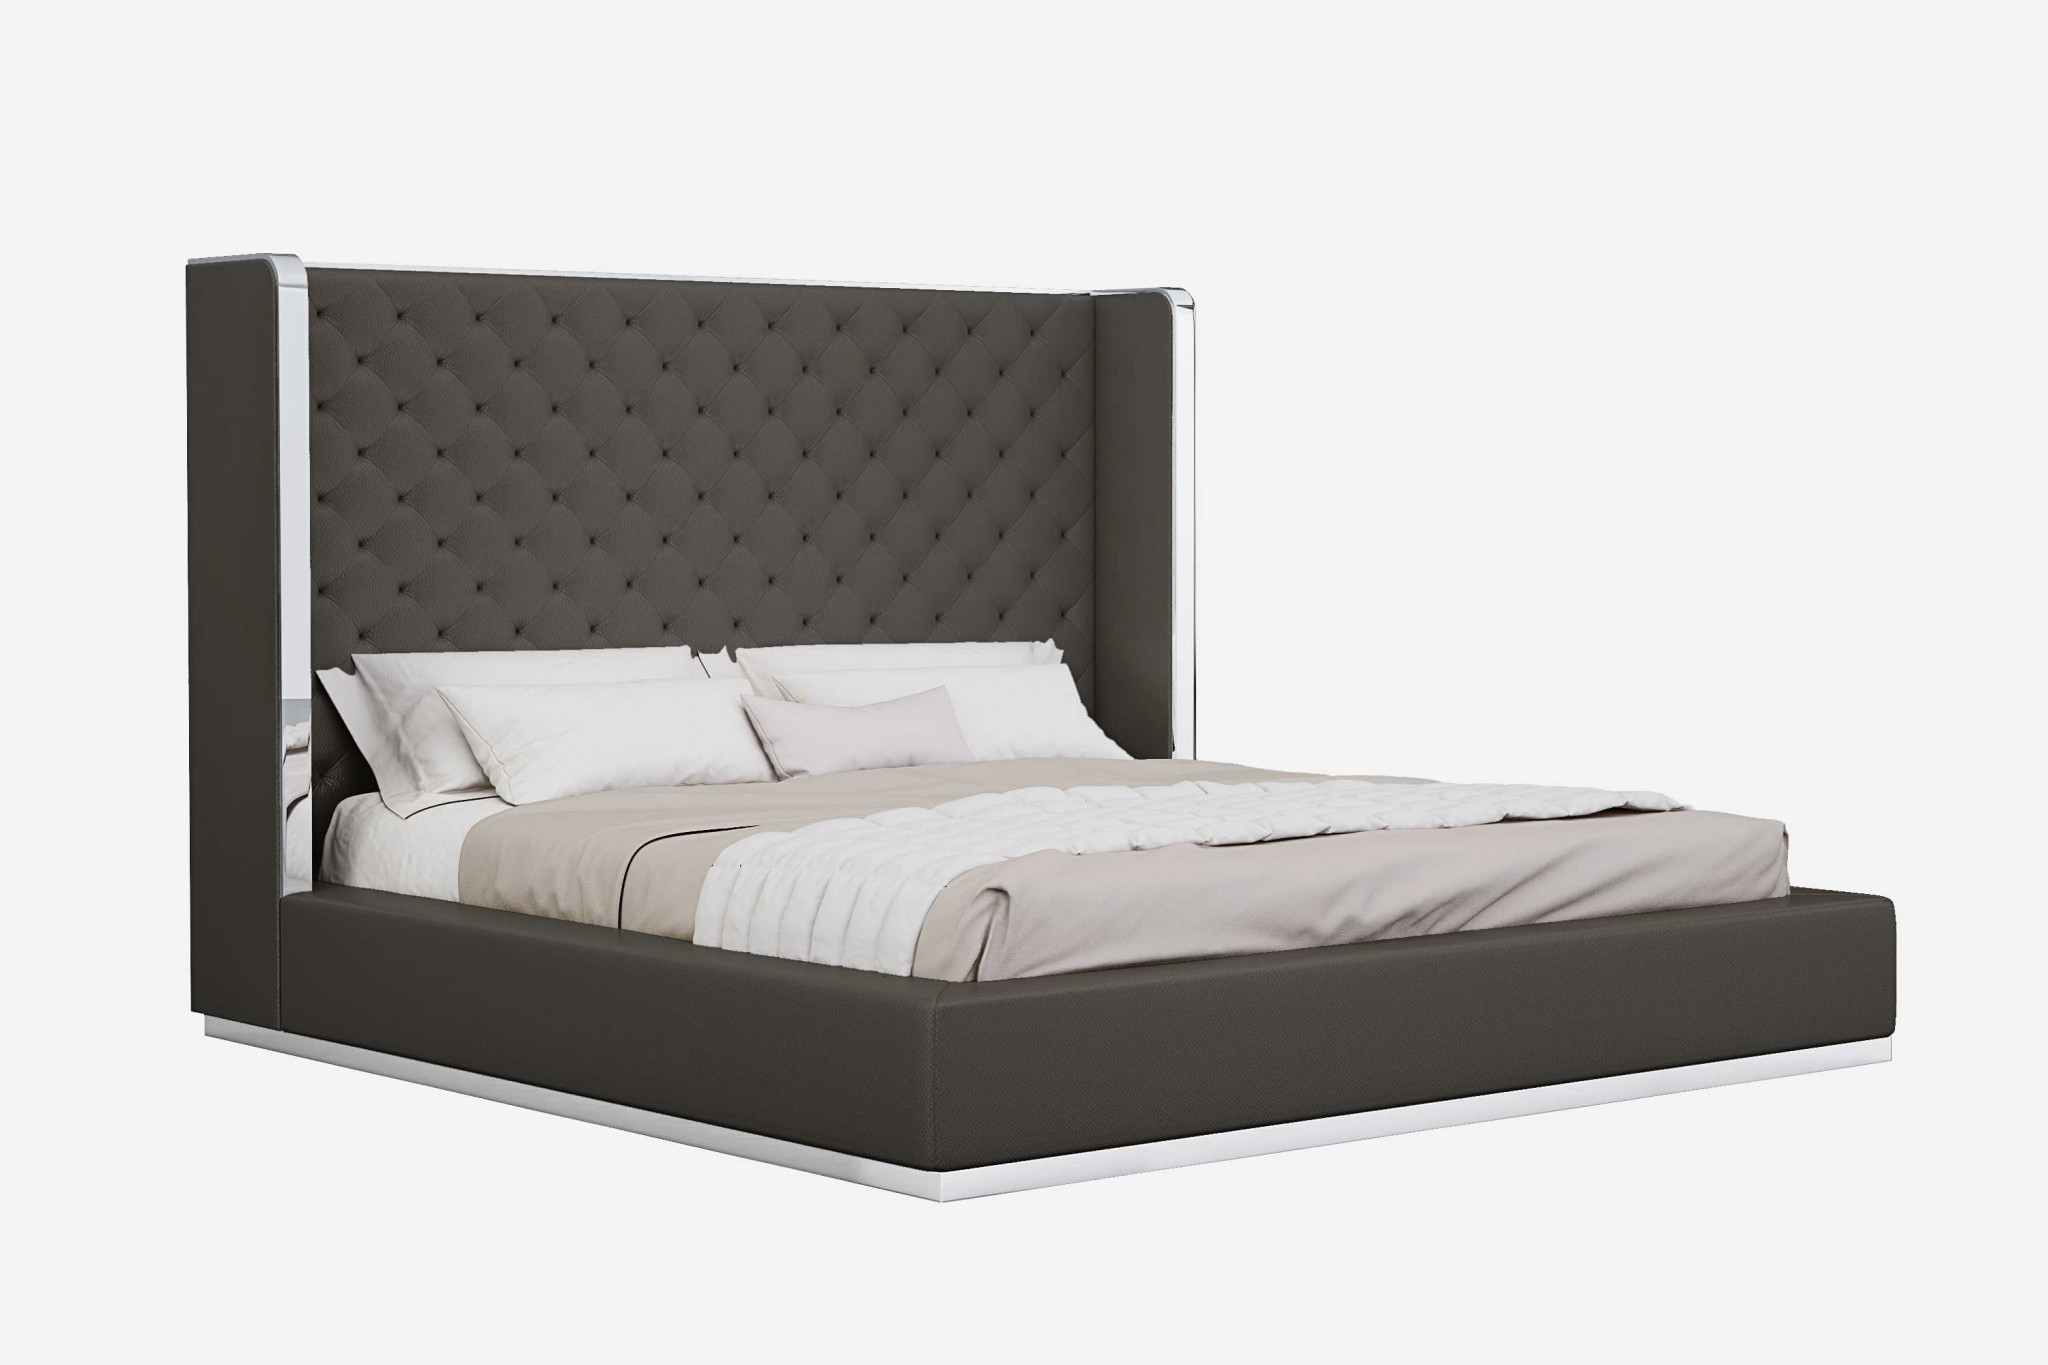 60" X 91" X 91" Dark Gray Faux Leather Bed King